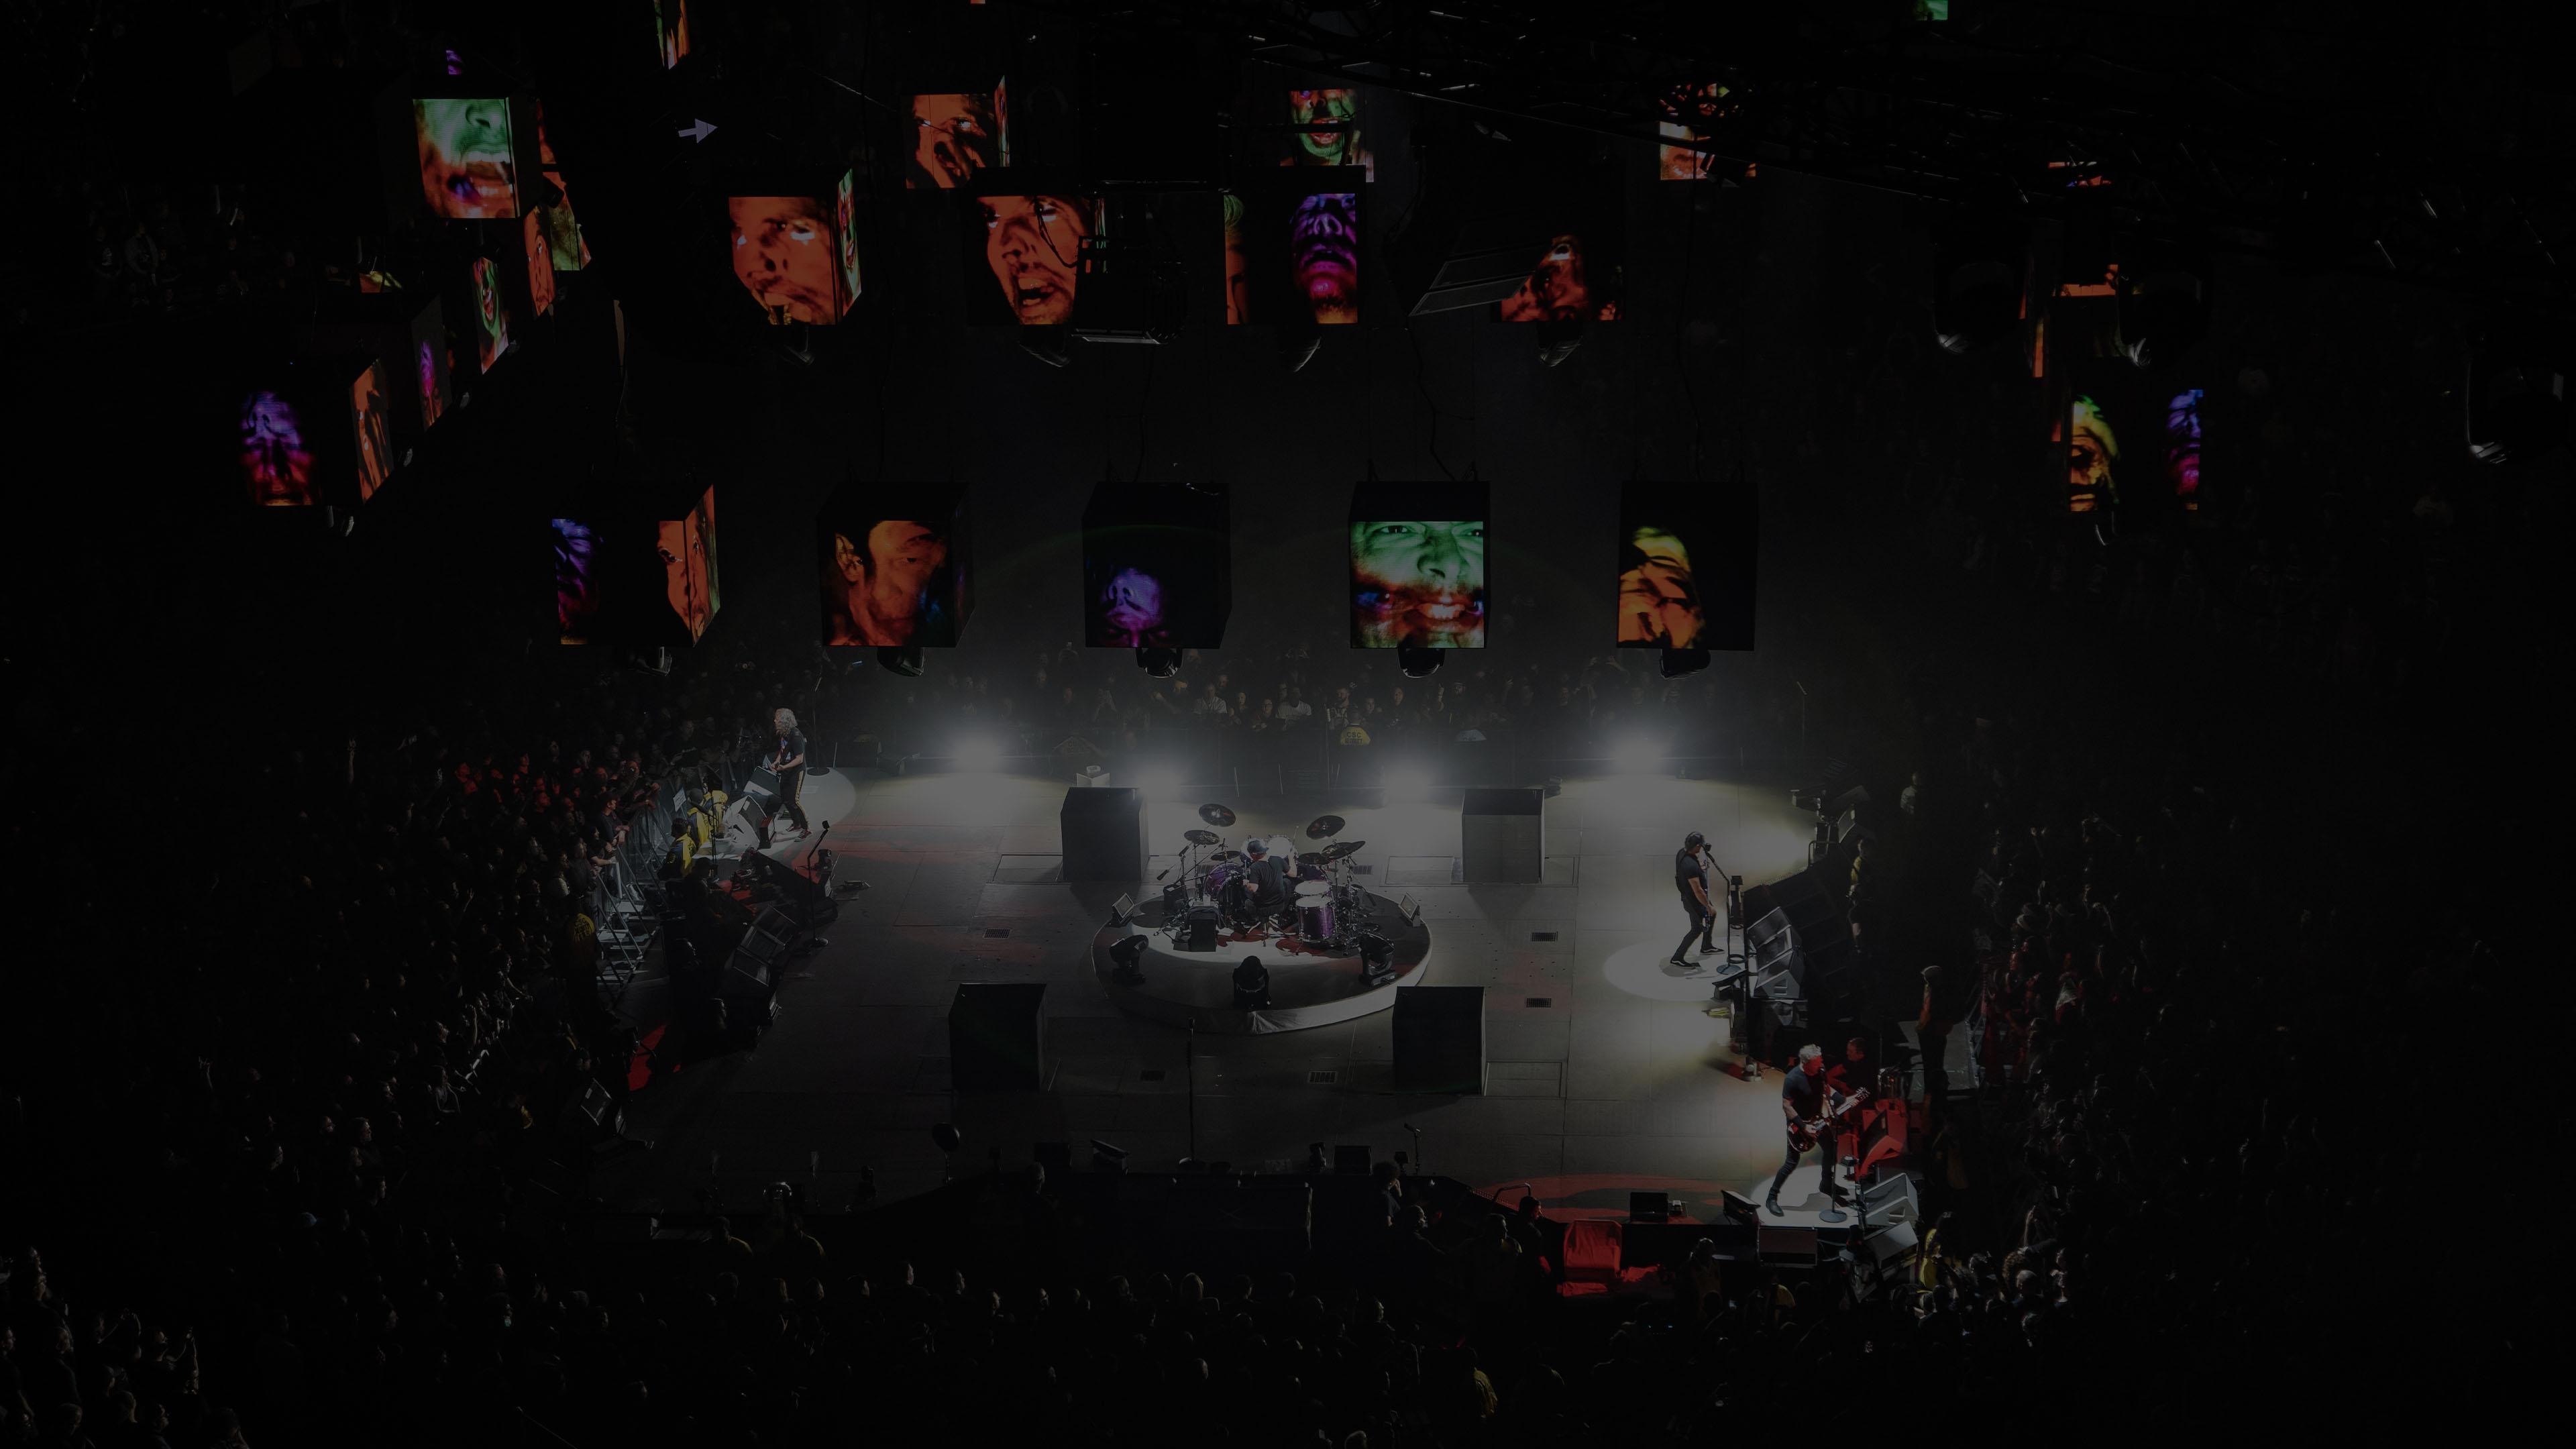 Banner Image for the photo gallery from the gig in Sacramento, CA shot on December 7, 2018